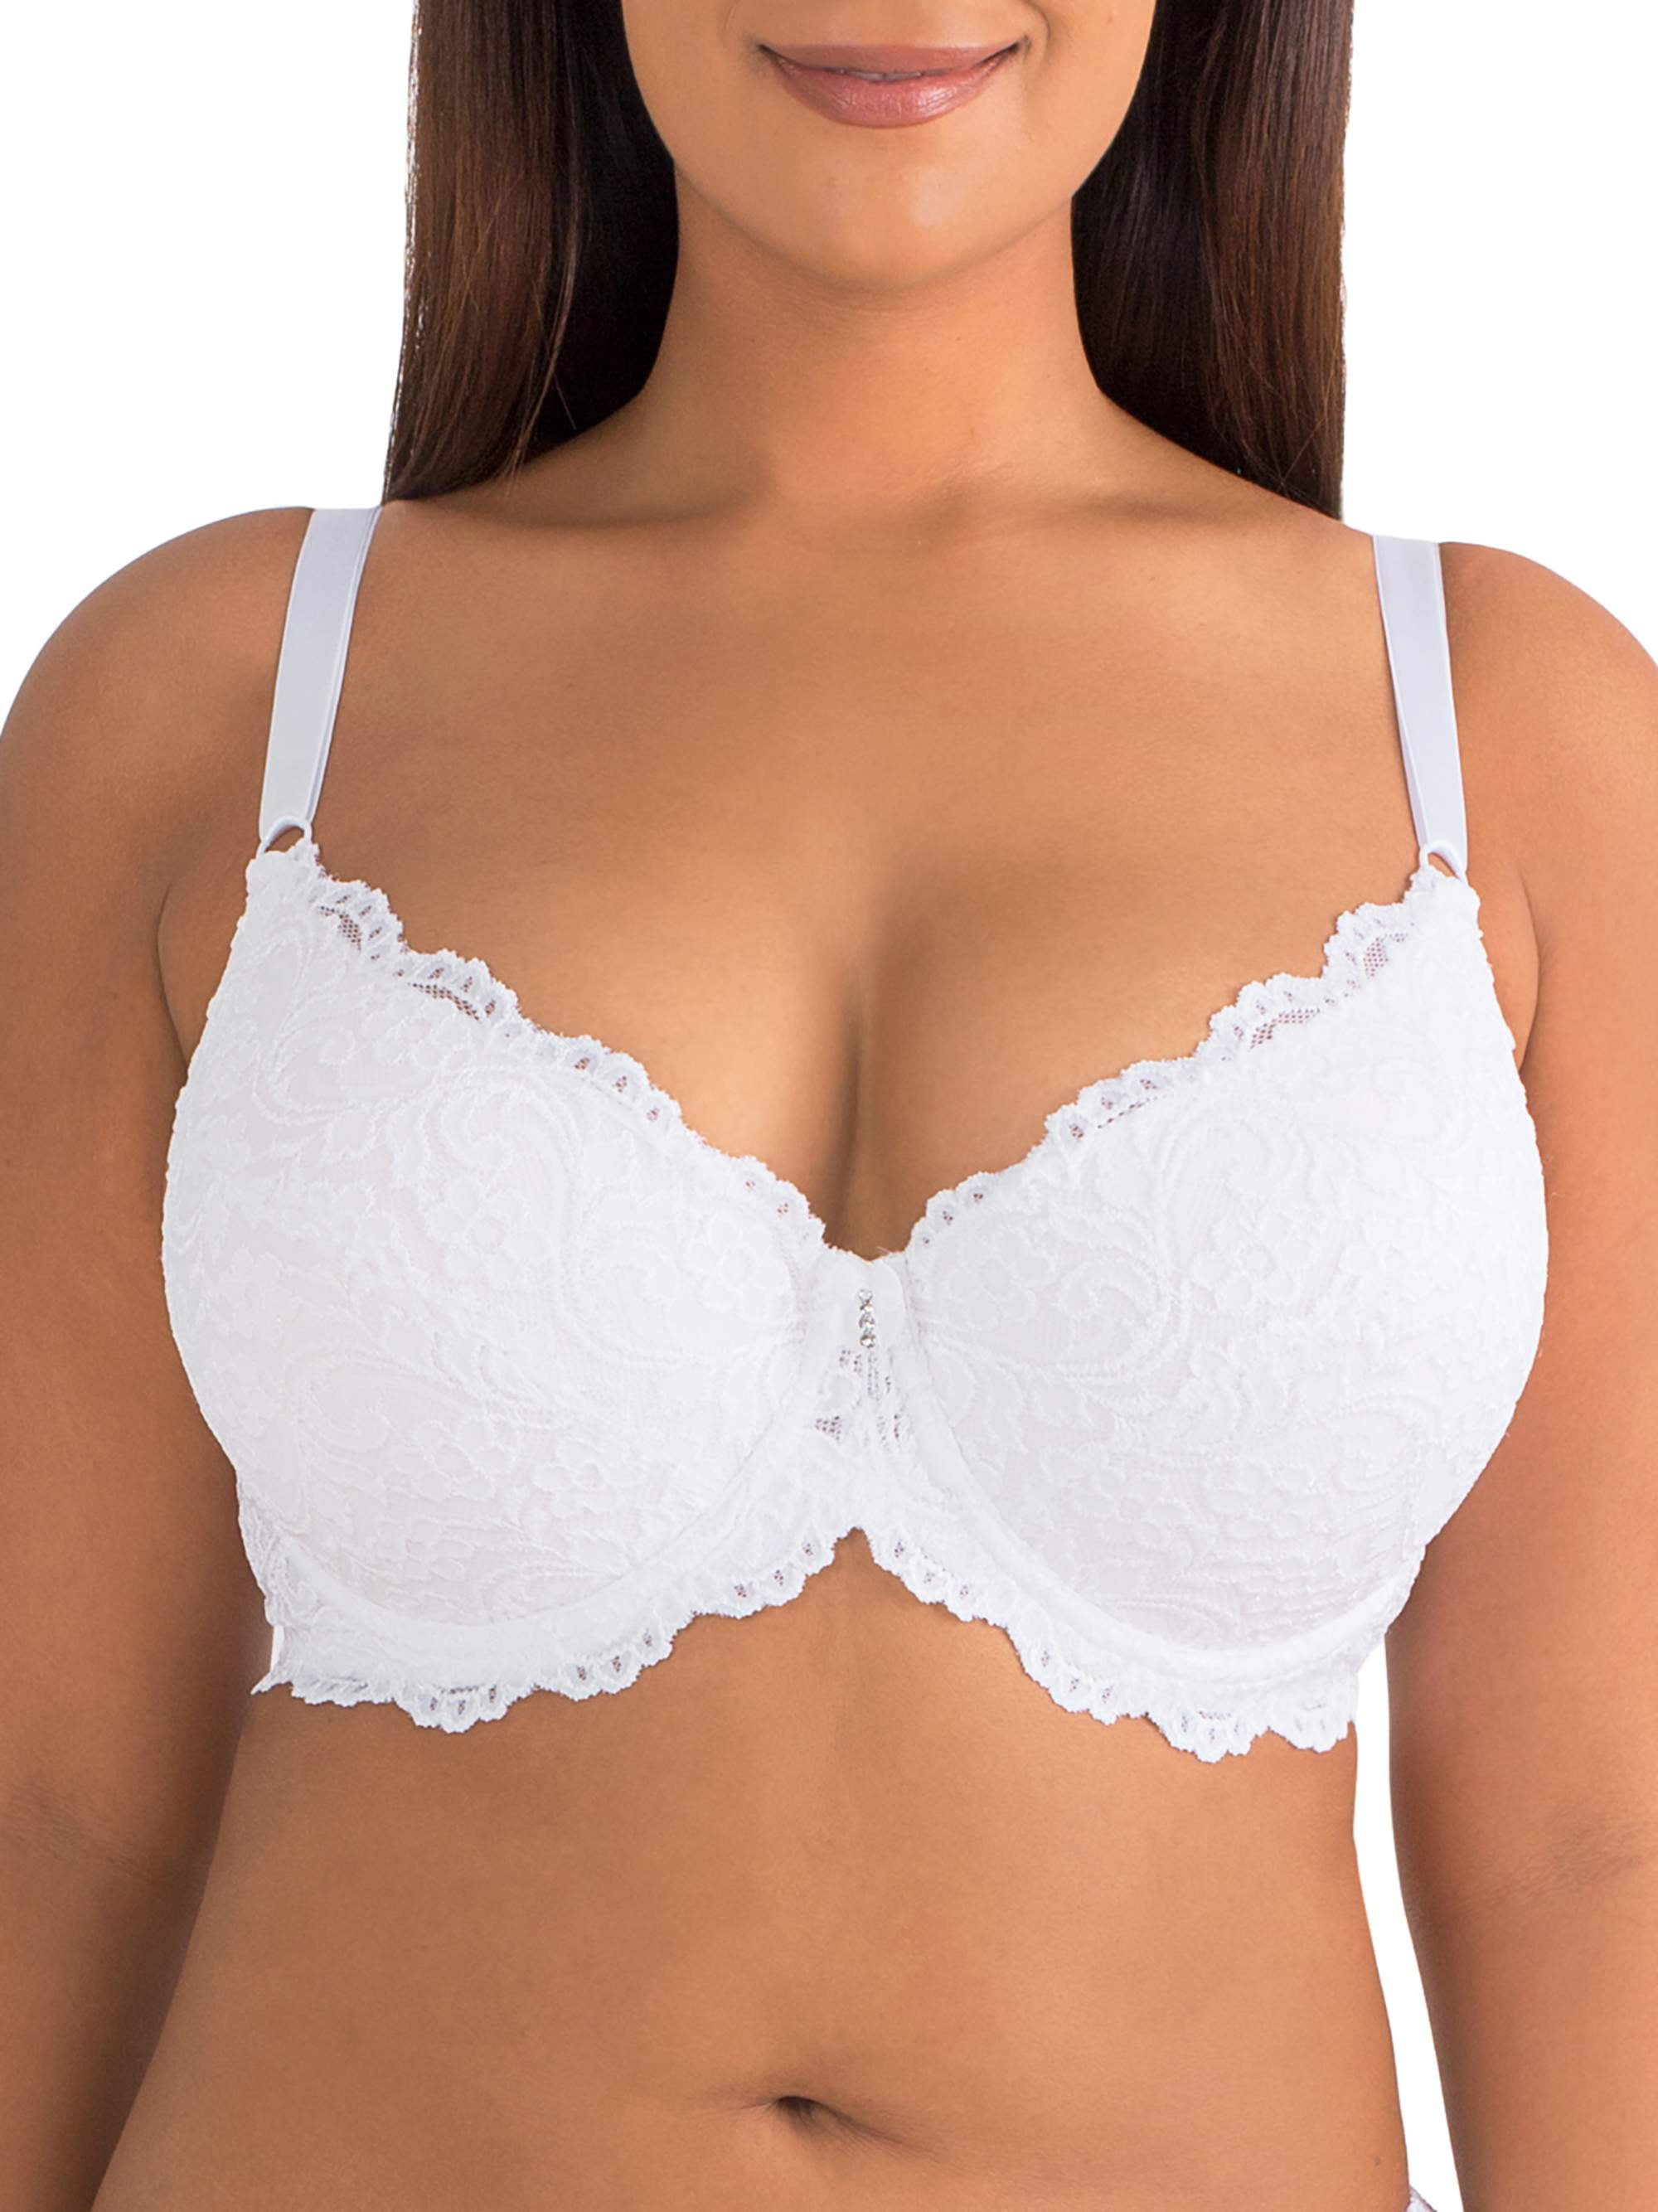 Smart & Sexy Women's Curvy Signature Lace Push-up Bra With Added Support